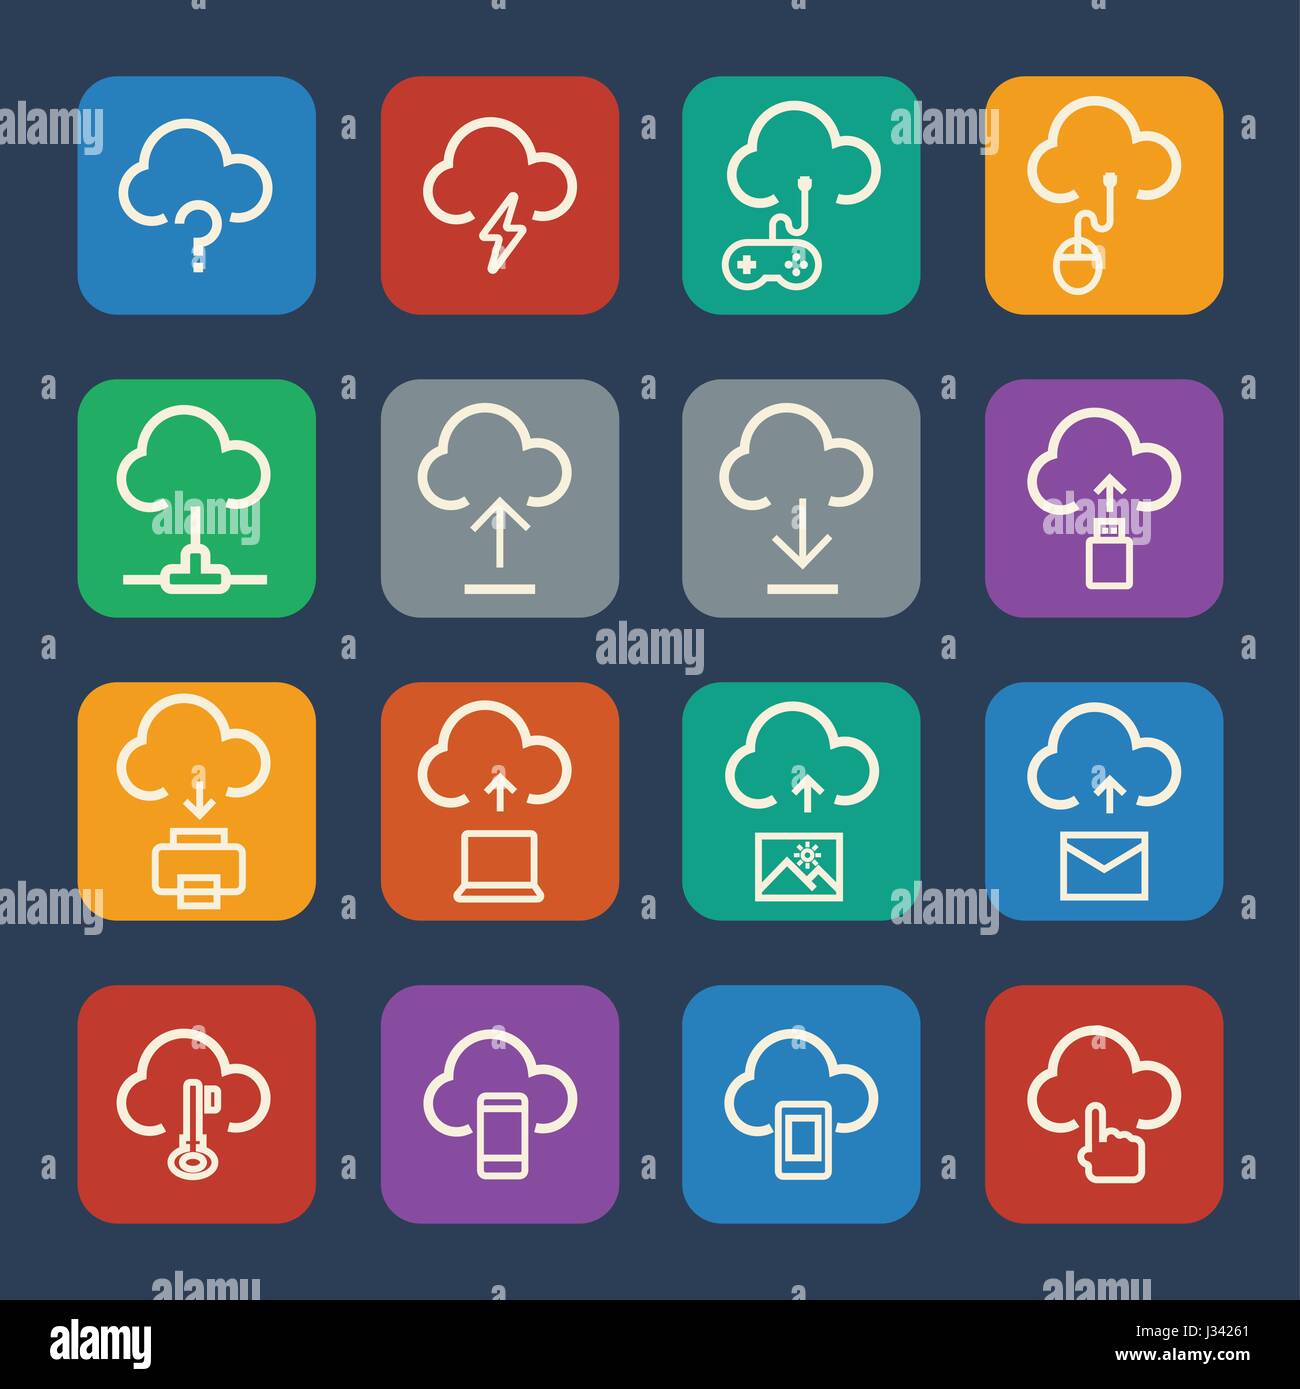 Cloud computing icons set for internet and application. Stock Vector